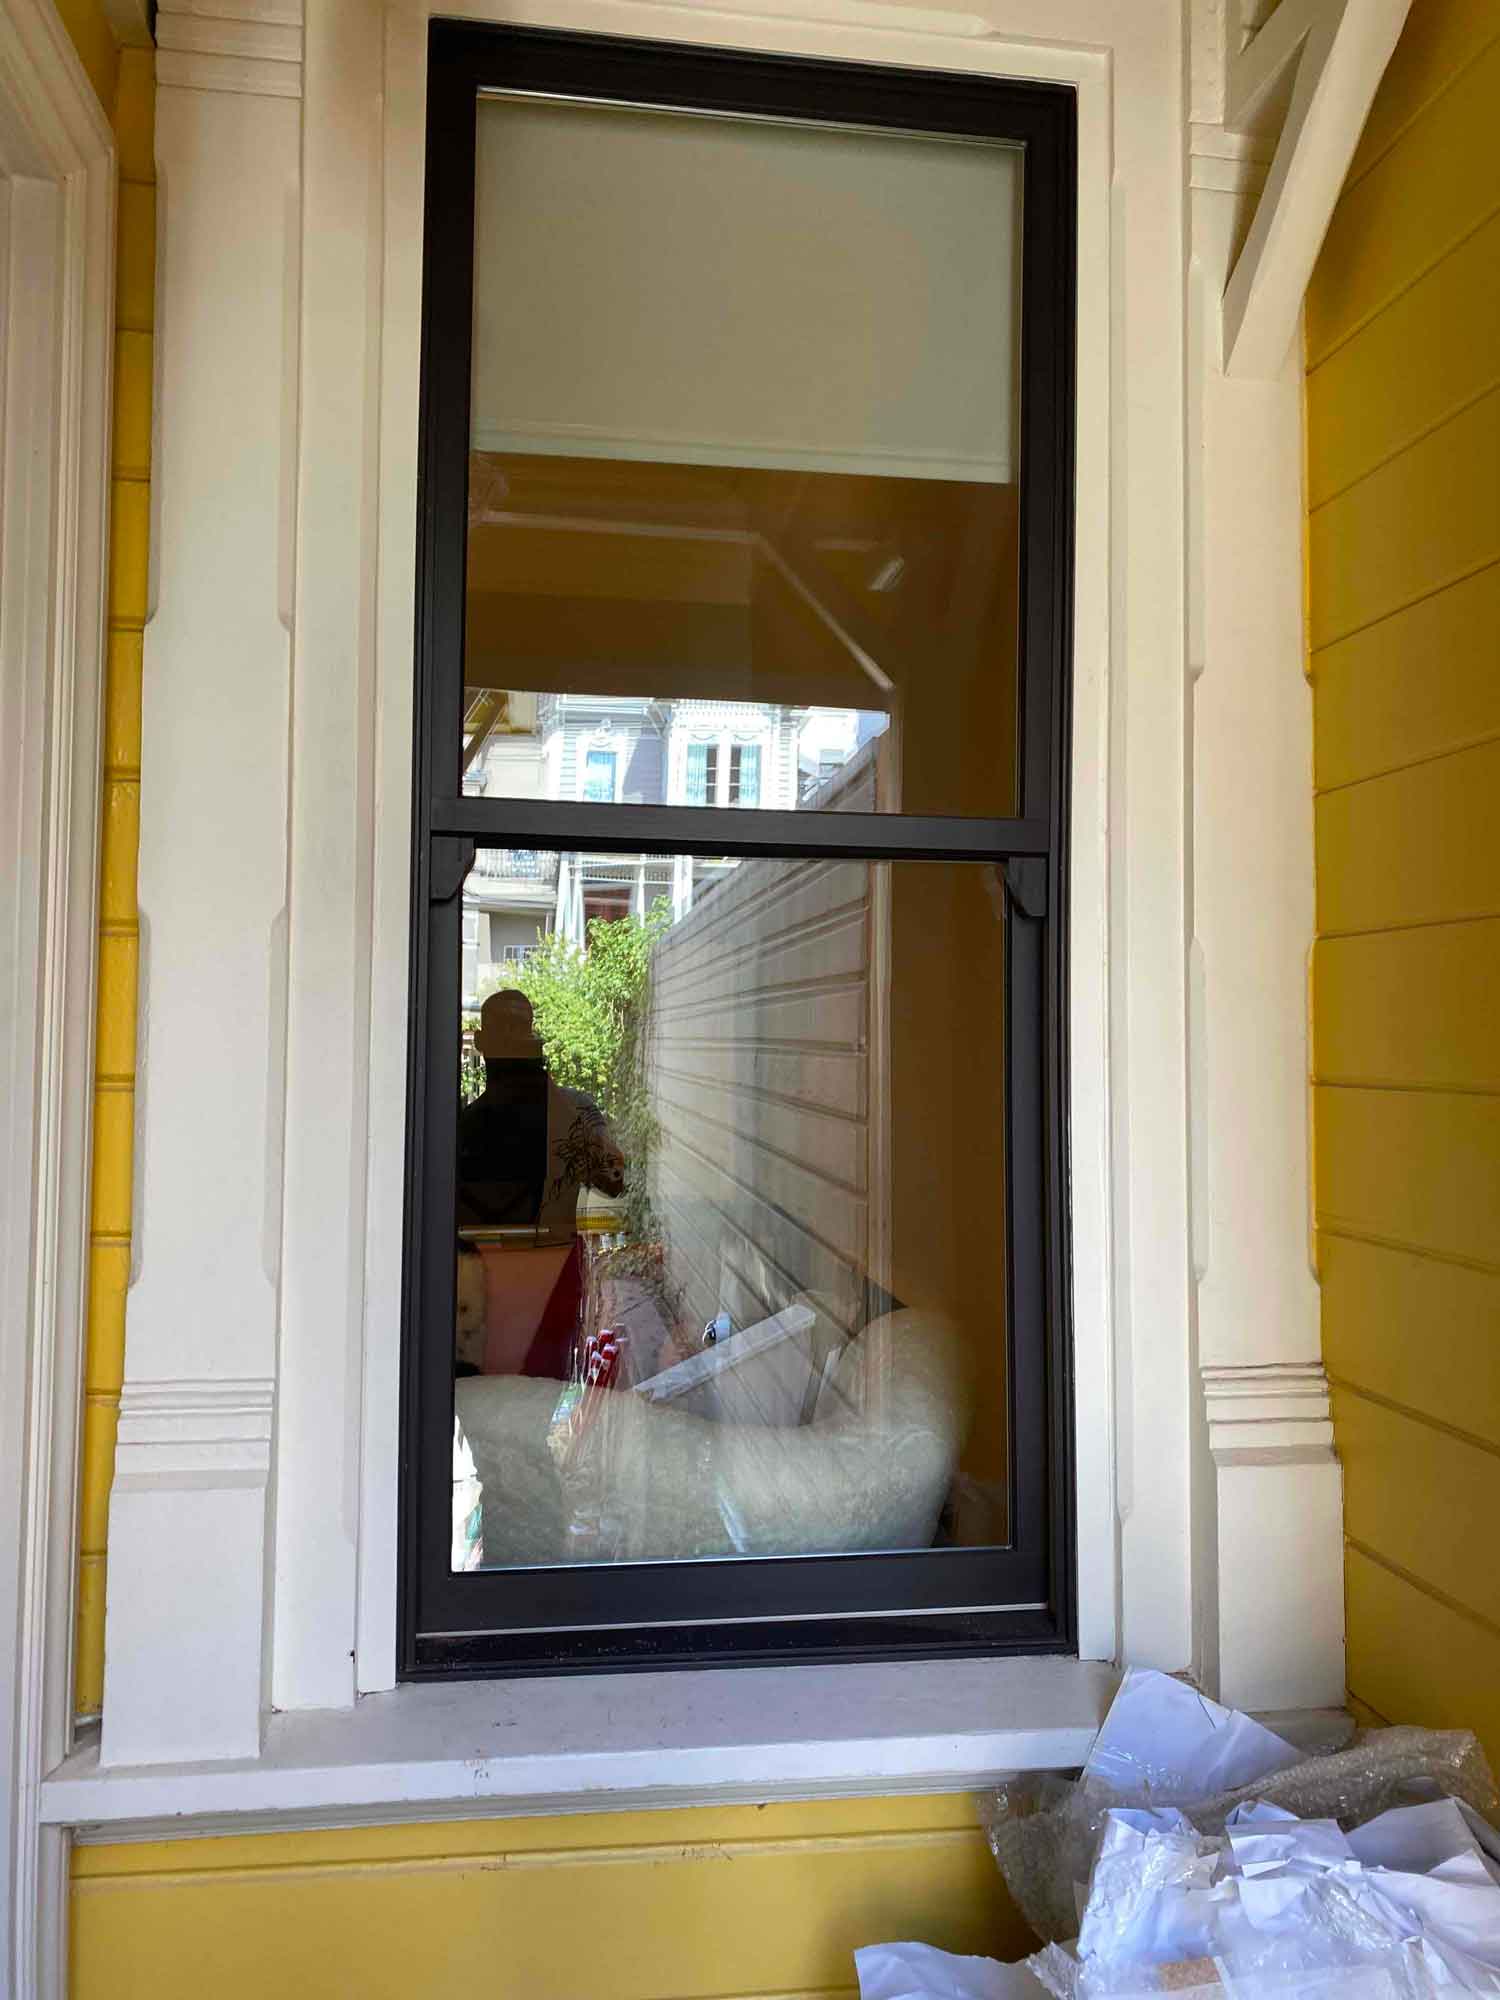 ClimatePro installed 3M Safety Window Film on the windows of this San Francisco home. Get a free estimate for your home today.